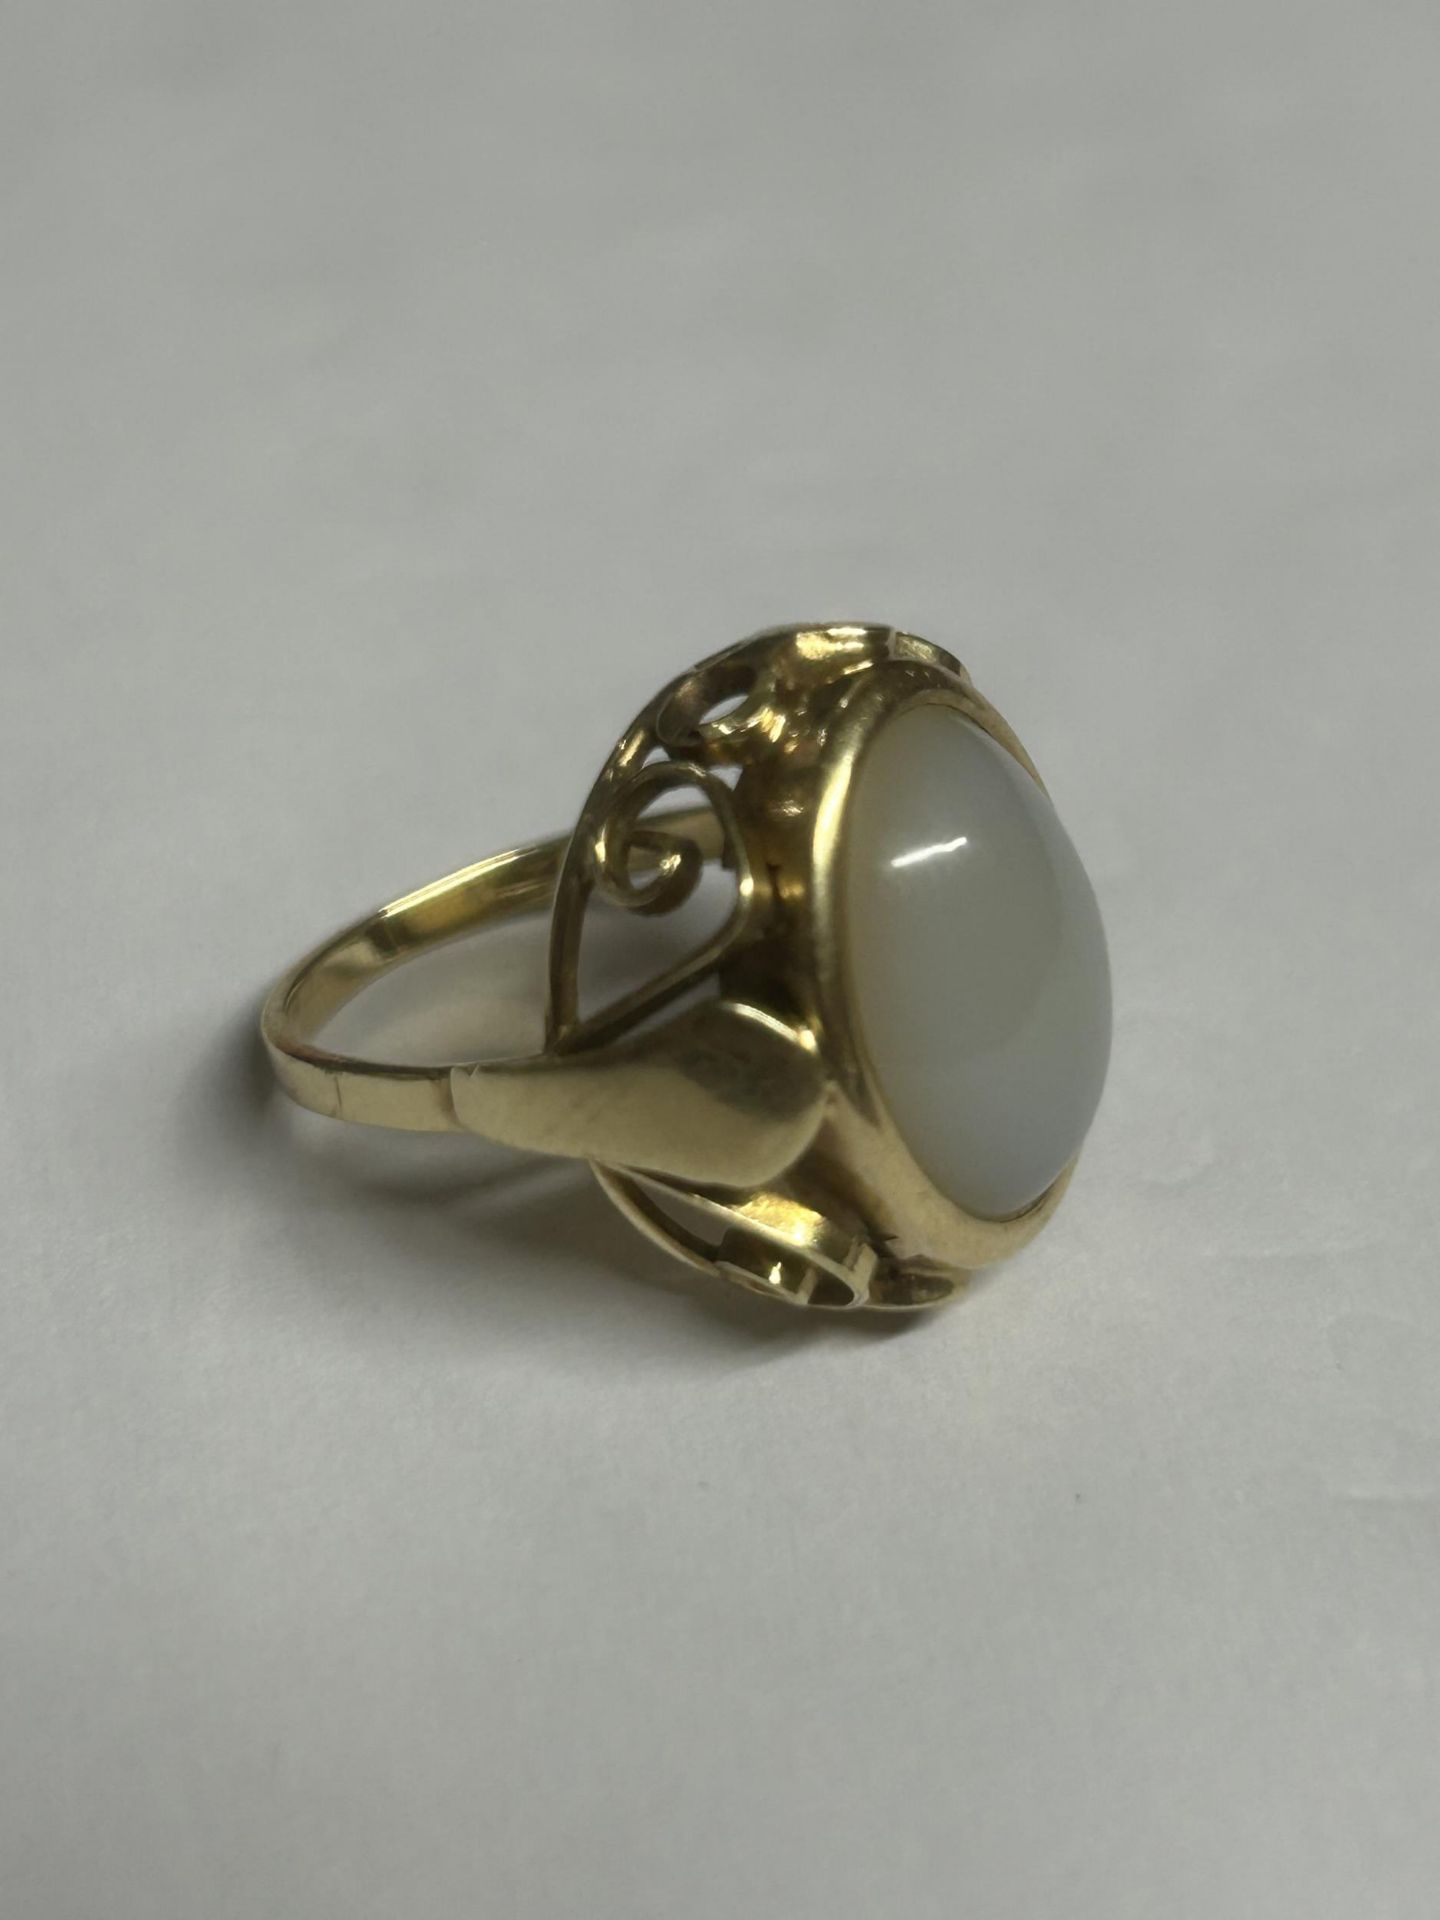 A 14CT GOLD DRESS RING, SIZE L. WEIGHT 5.09 GRAMS